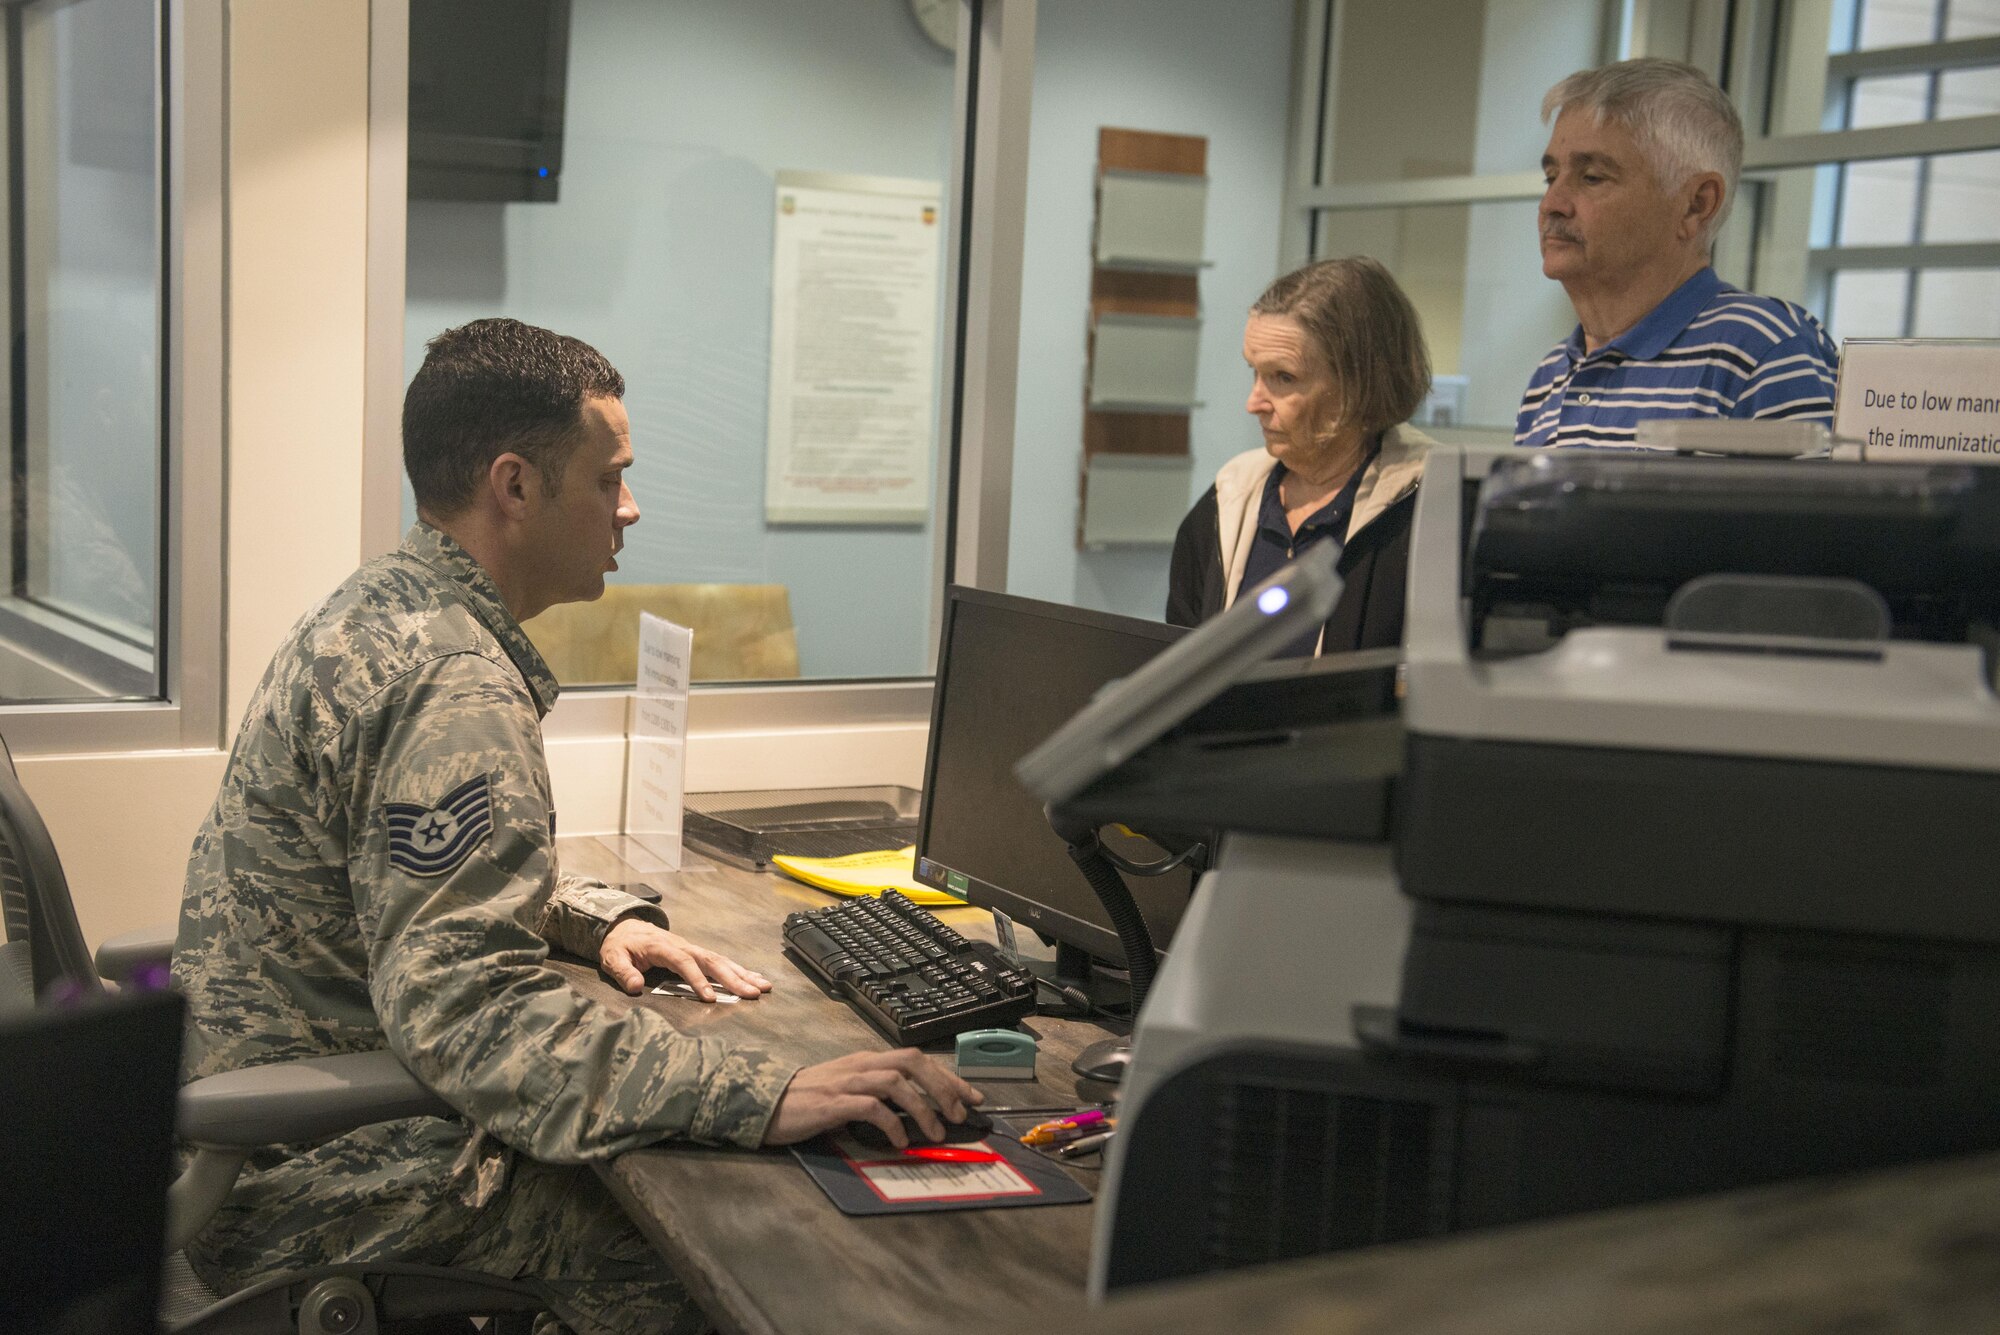 U.S. Air Force Tech. Sgt. Richard Sangston, 20th Medical Operations Squadron immunizations clinic noncommissioned officer in charge, helps patients at the front desk of the immunizations clinic at Shaw Air Force Base, South Carolina, Oct. 23, 2017.